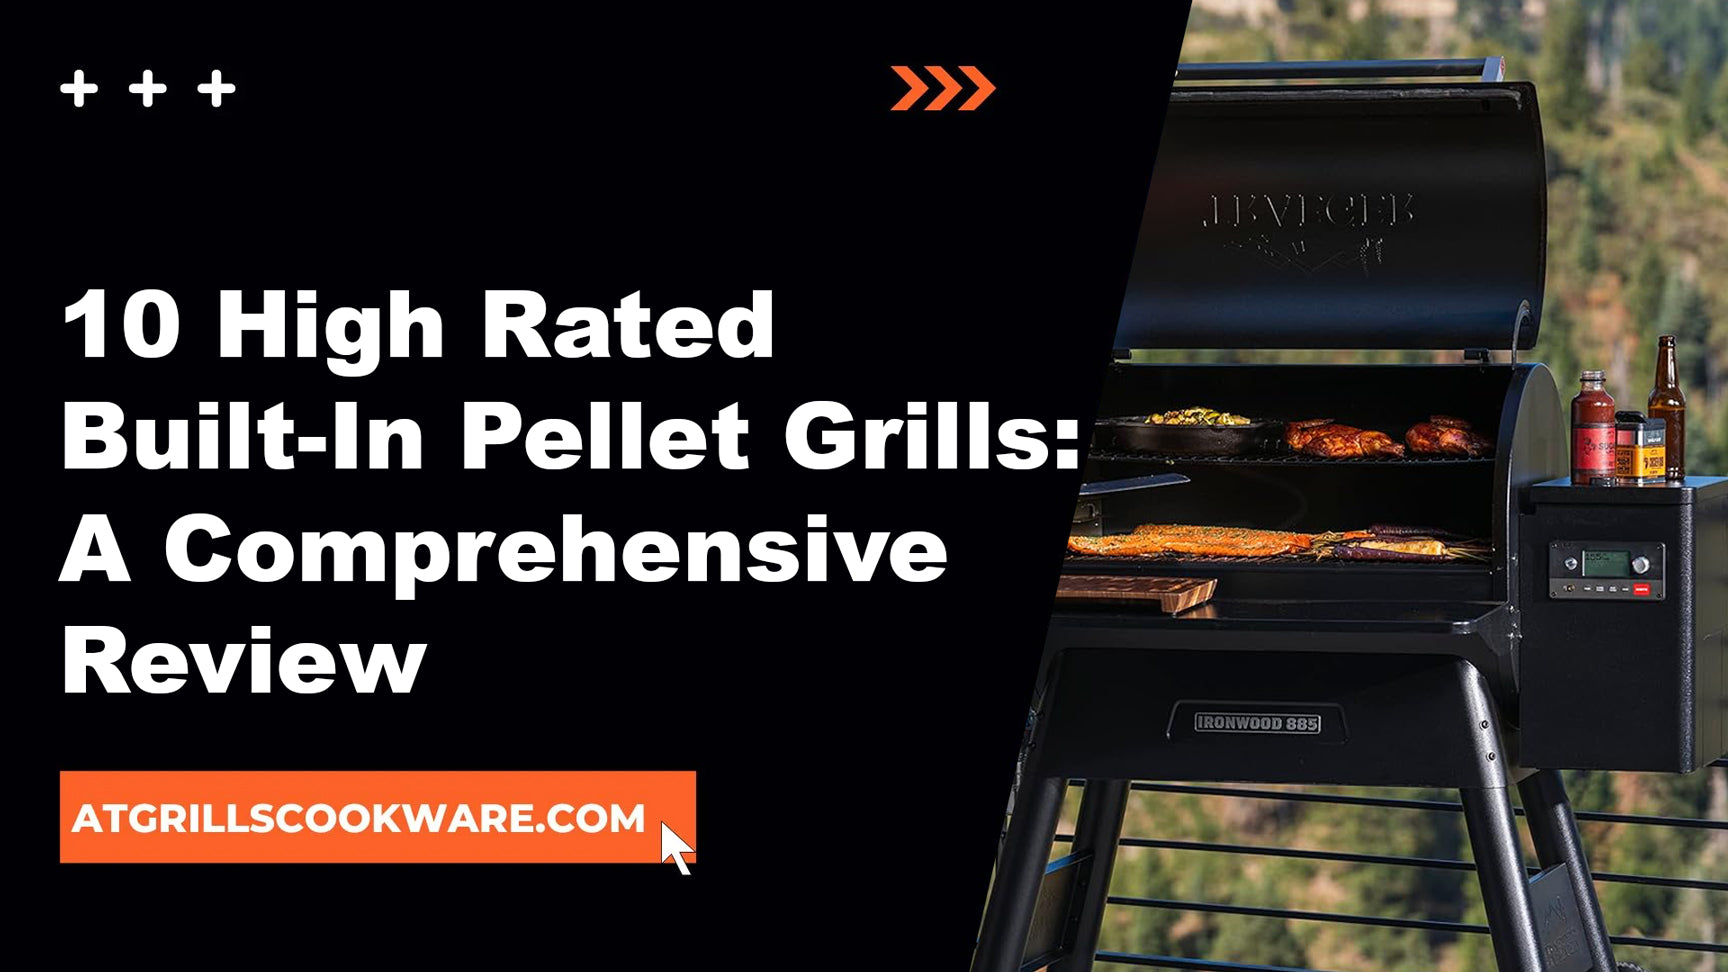 10 High Rated Built-In Pellet Grills: A Comprehensive Review